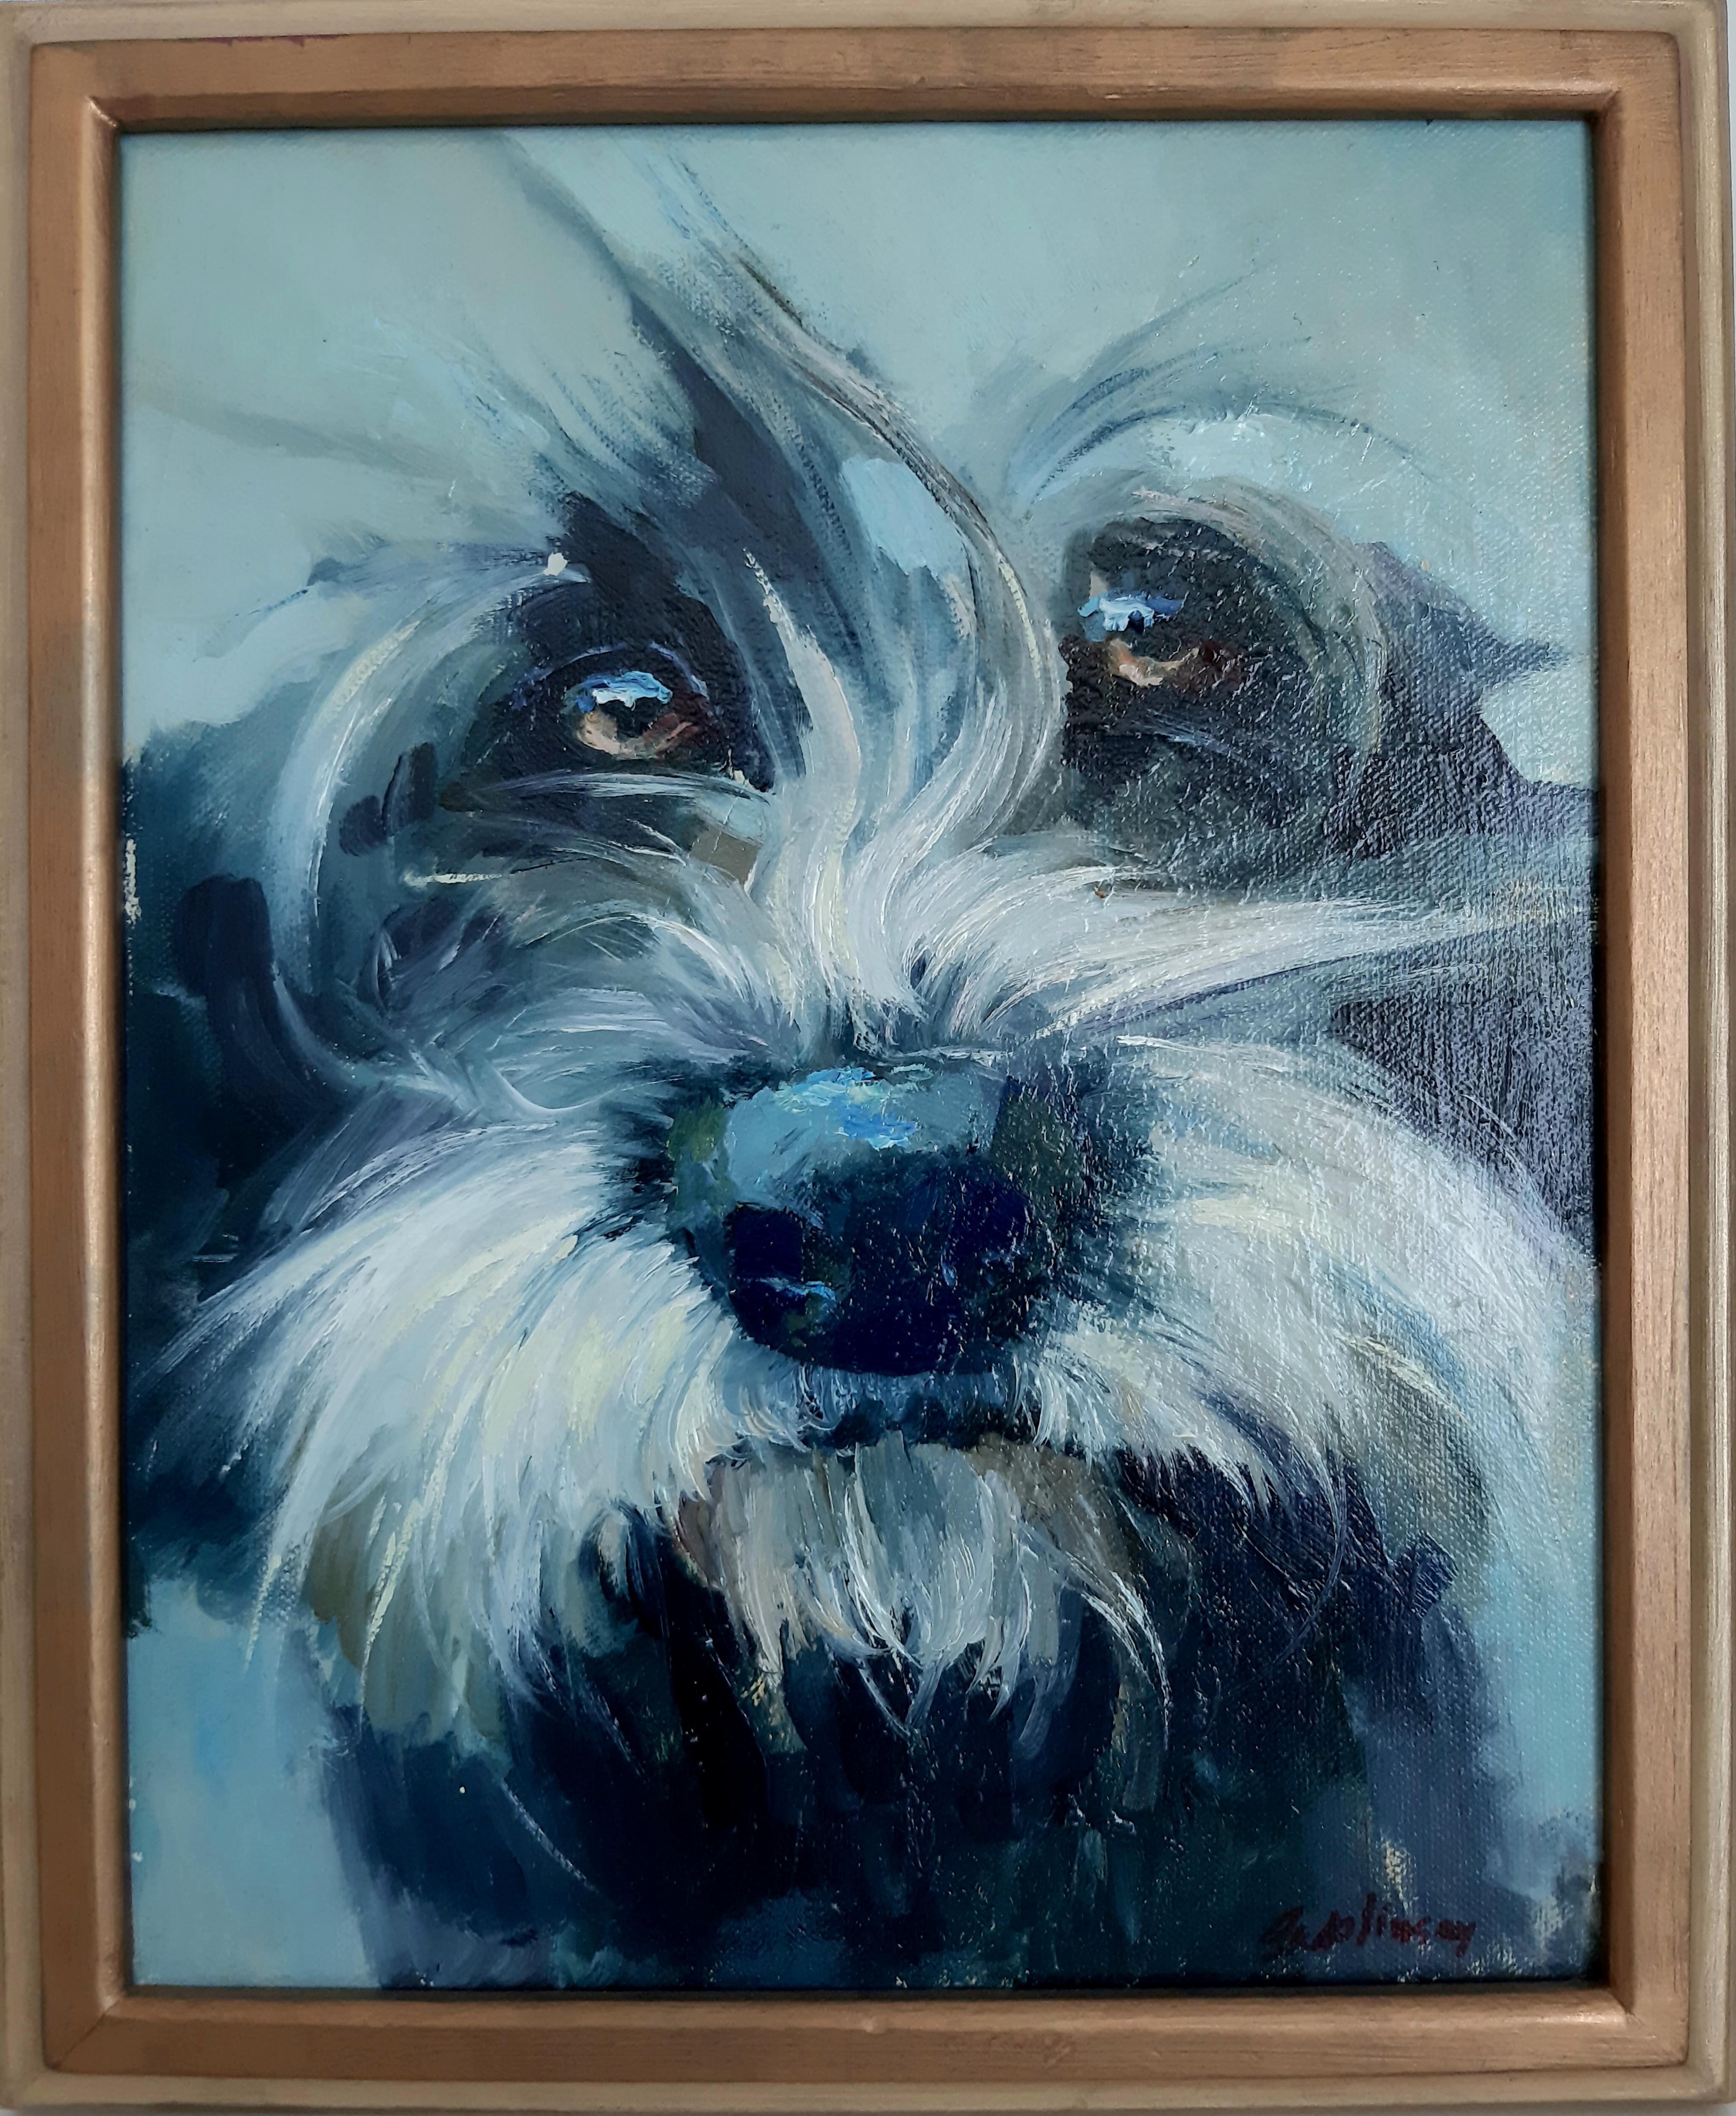 In this oil painting, we observe a portrait of a dog gazing at the viewer. Its eyes are brimming with questions as if it's asking, 